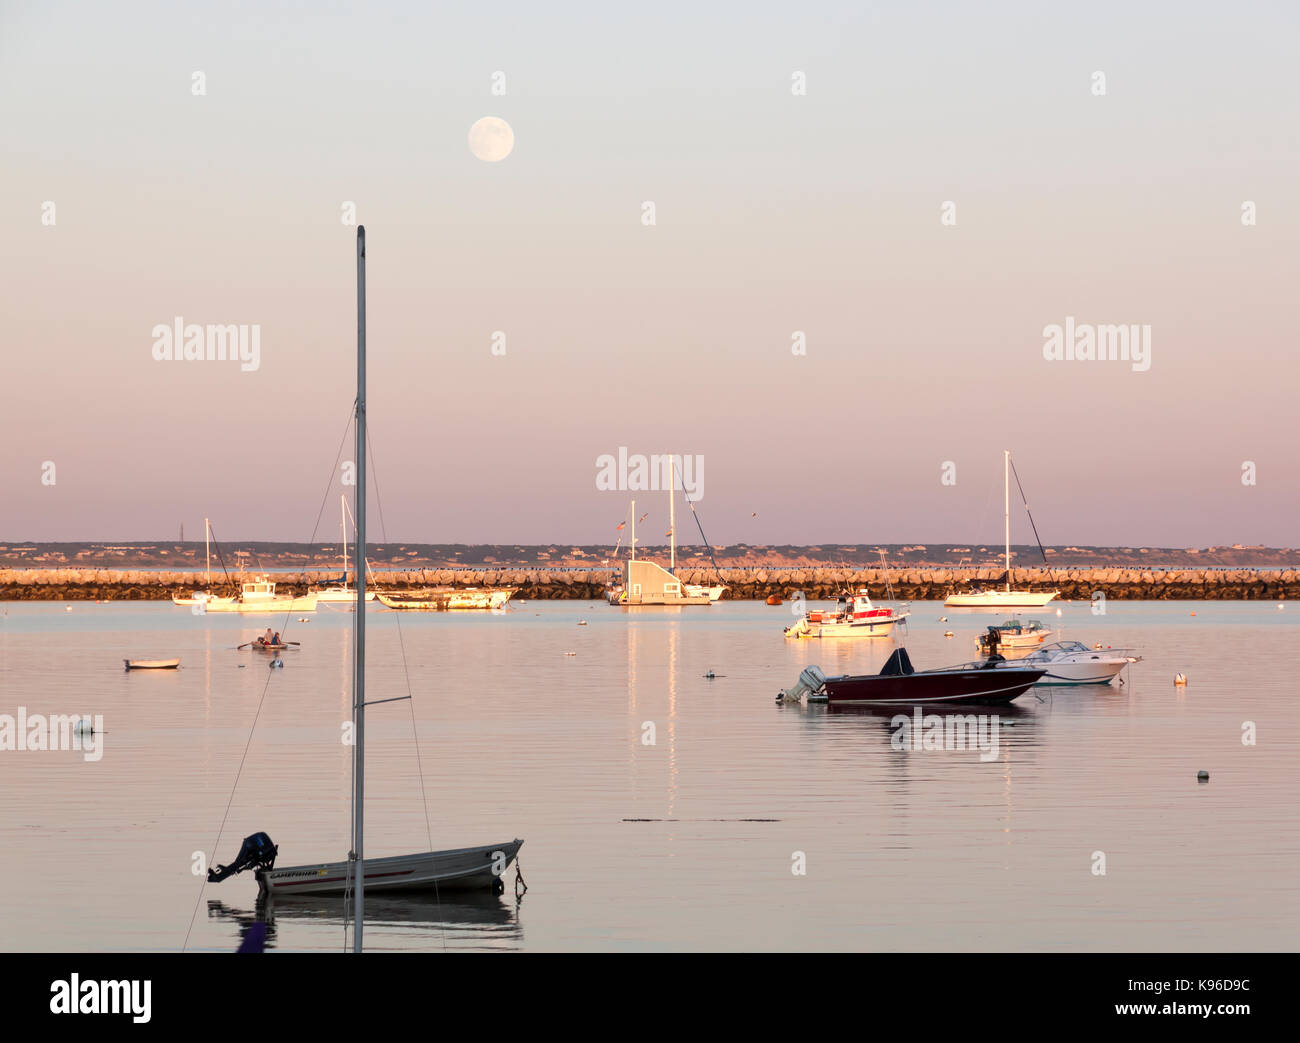 Harbor boats at dusk in Provincetown, Massachusetts, Cape Cod, United States. Stock Photo